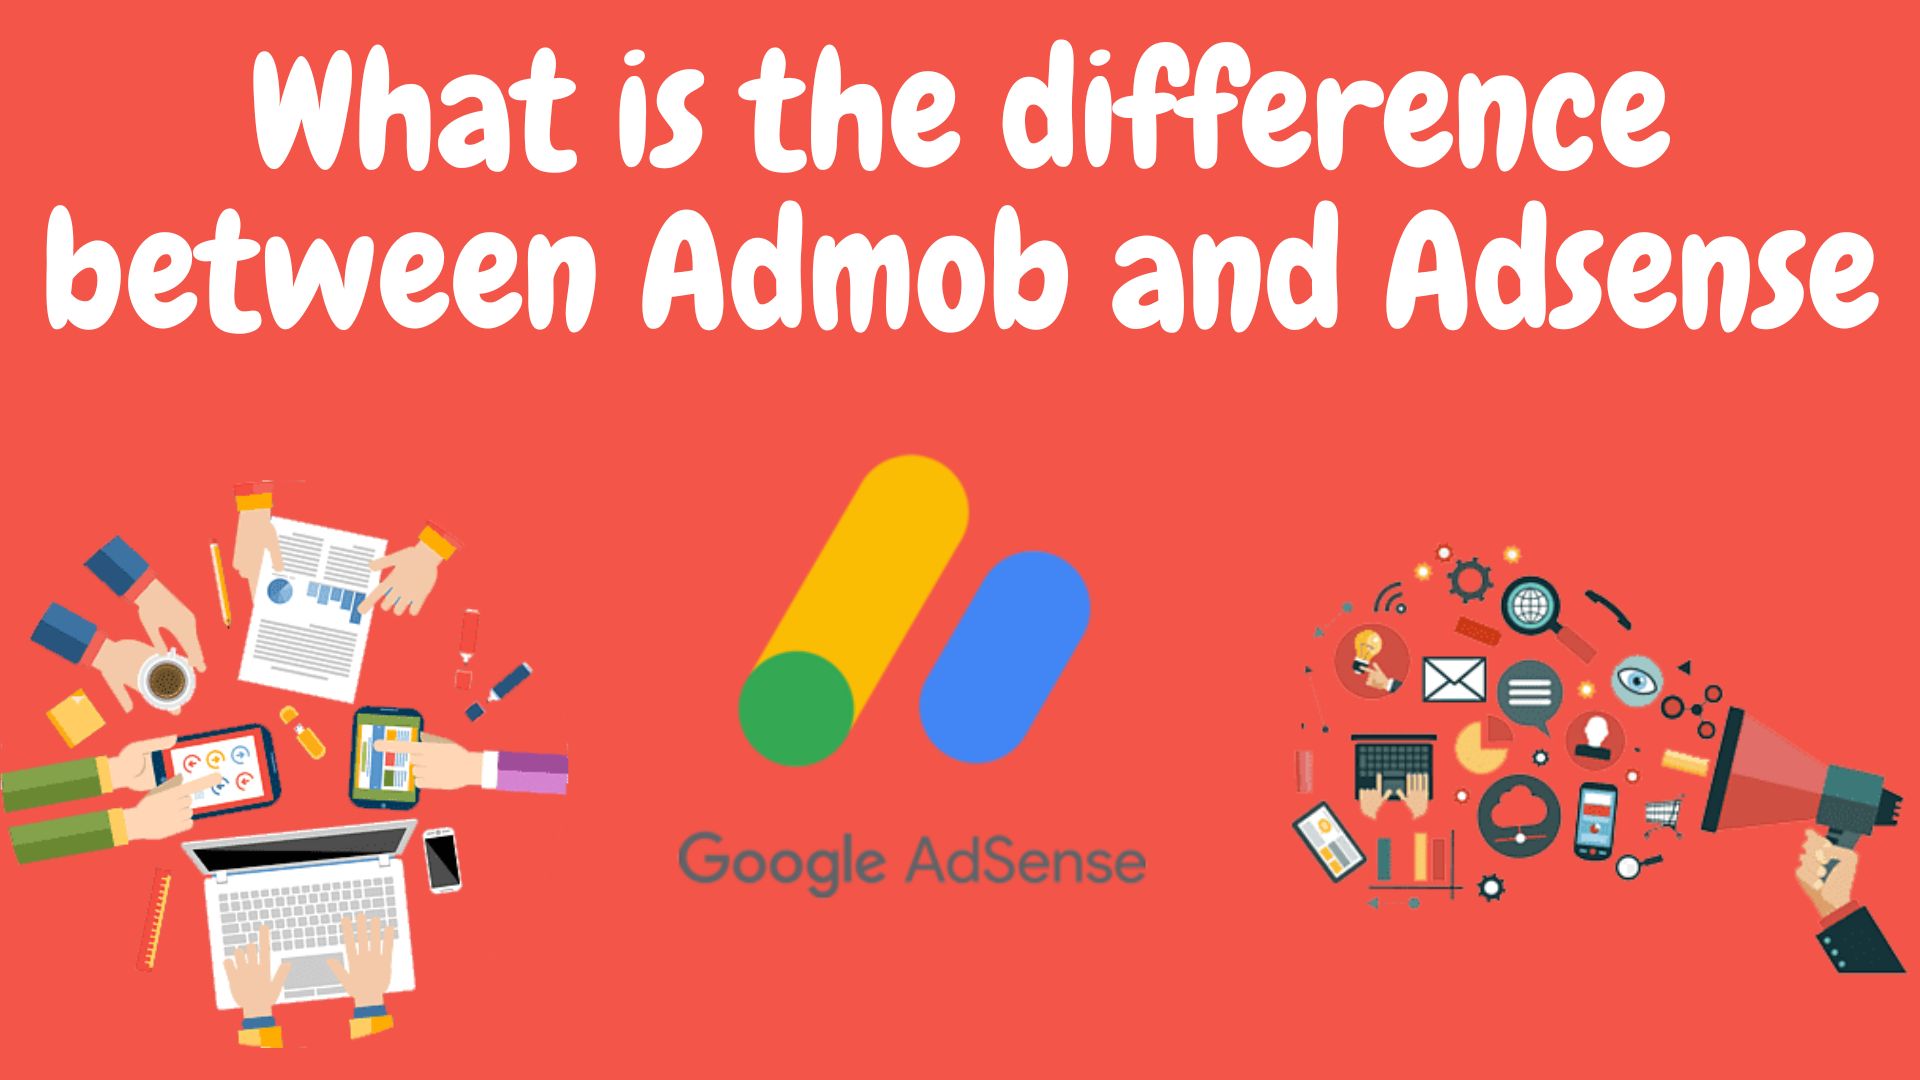 What is the difference between admob and adsense